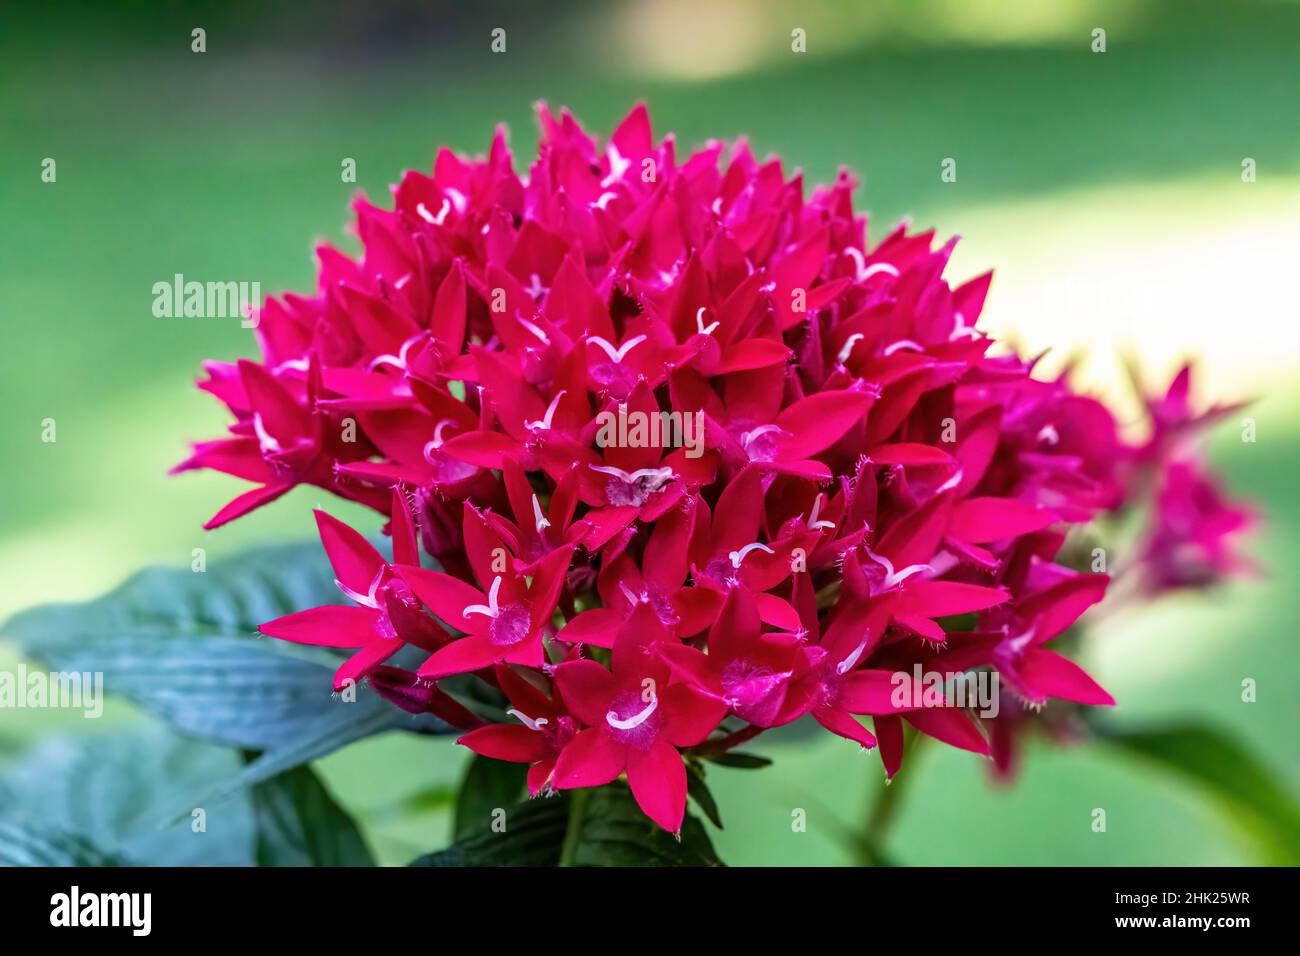 Red pentas, butterfly plant called lipstick in the summer garden. Closeup of the red blossoms also known as egyptian stars. Stock Photo